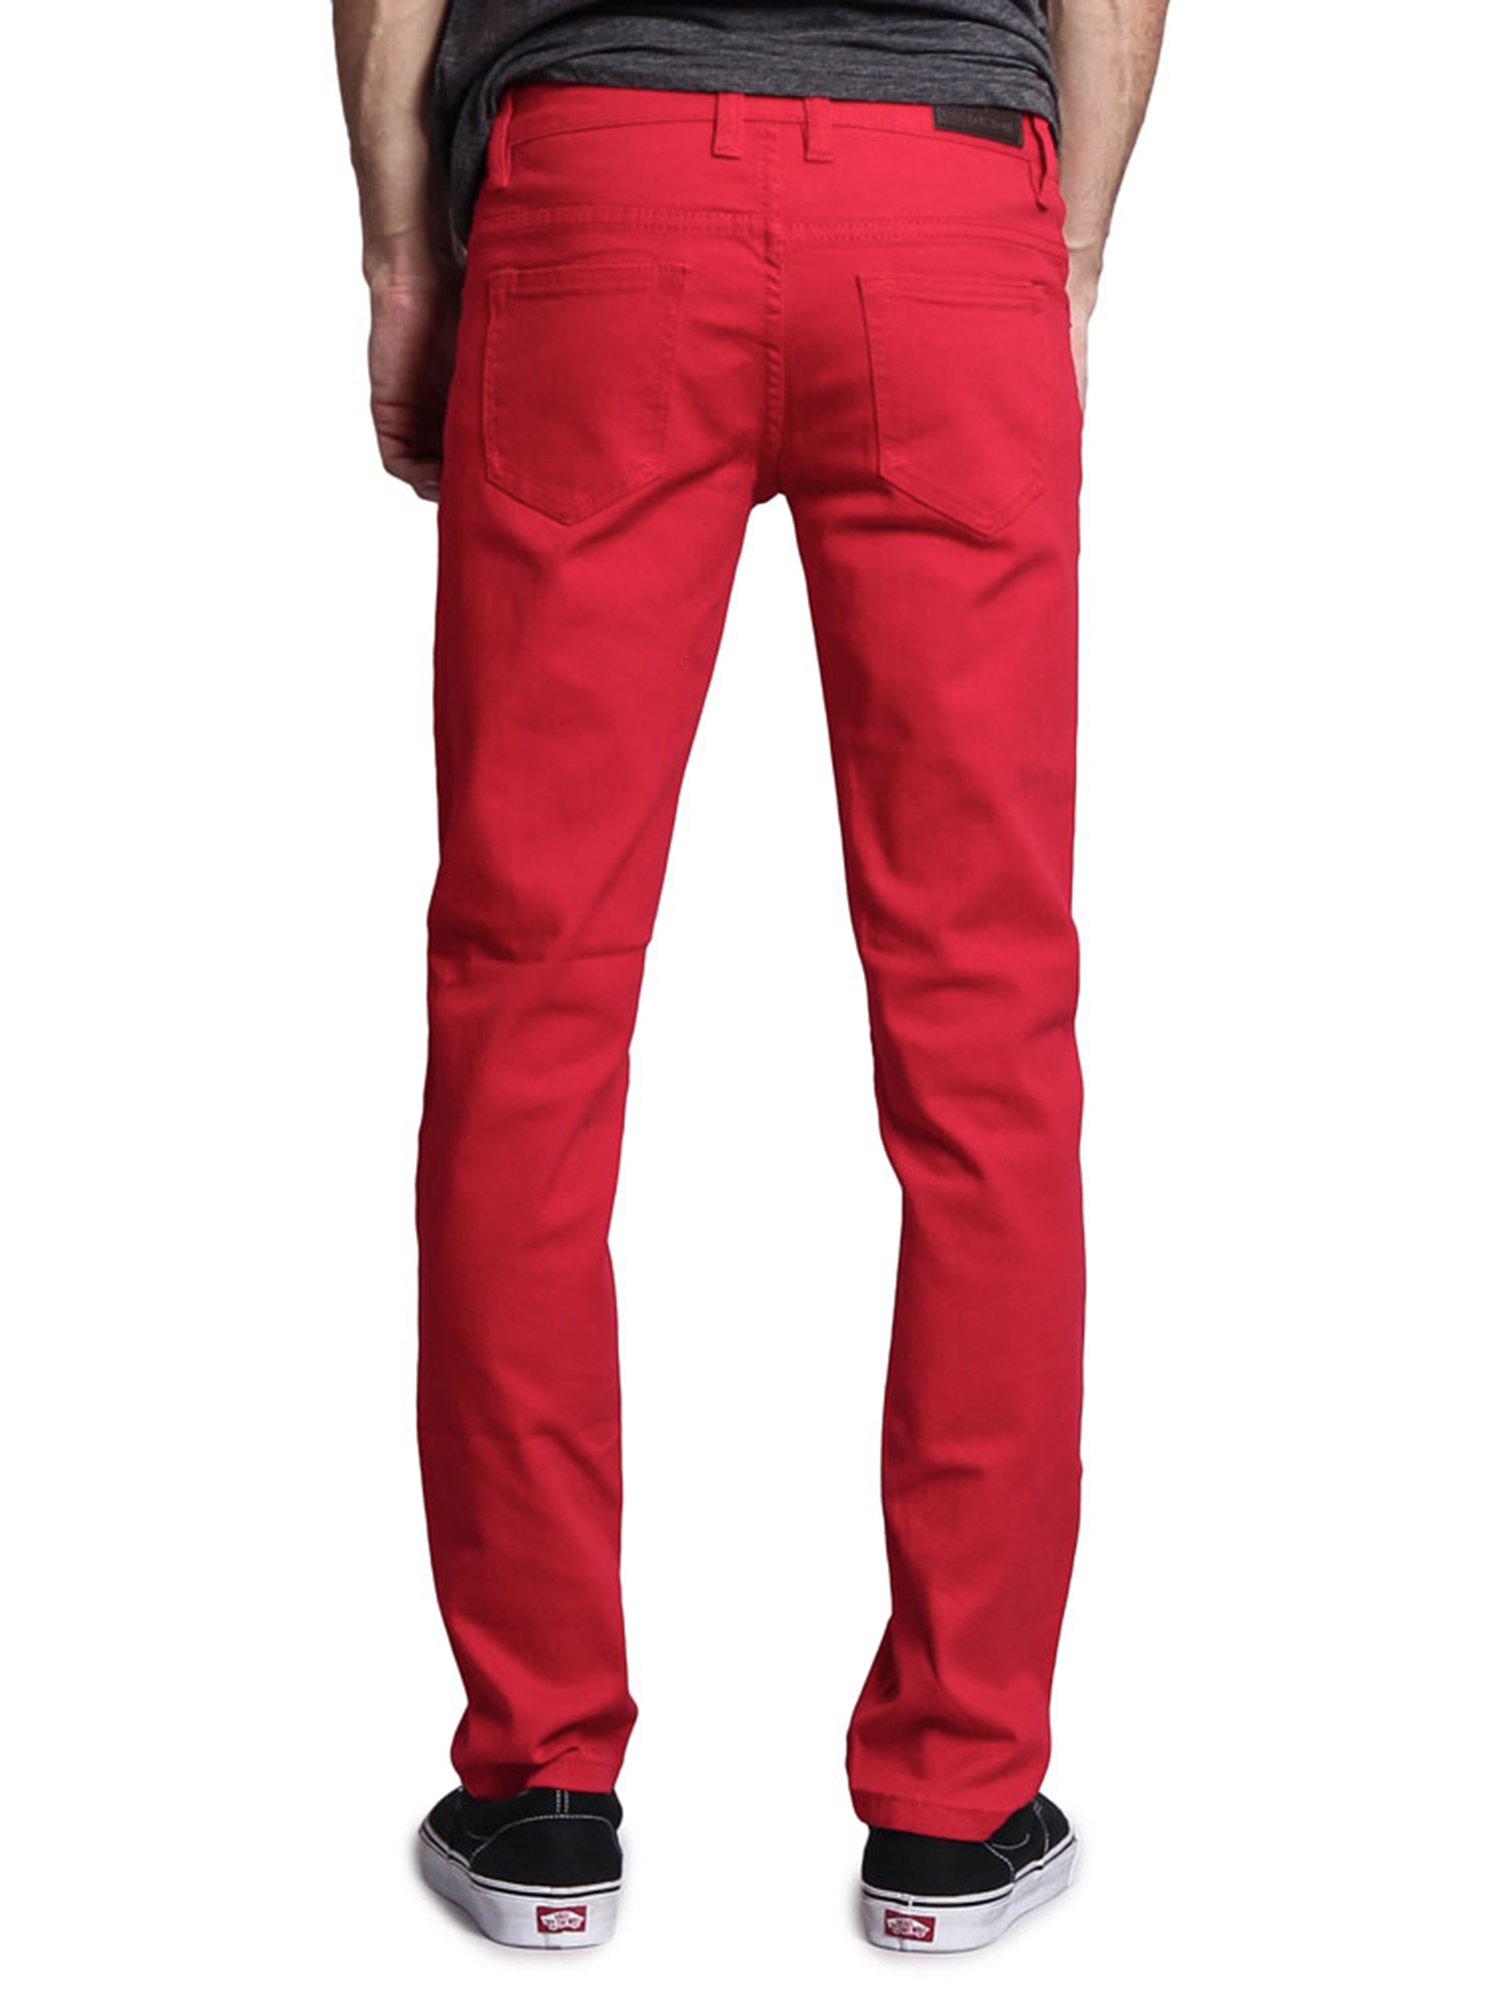 Victorious Mens Slim Fit Colored Stretch Jeans, Up To 44W - image 3 of 6